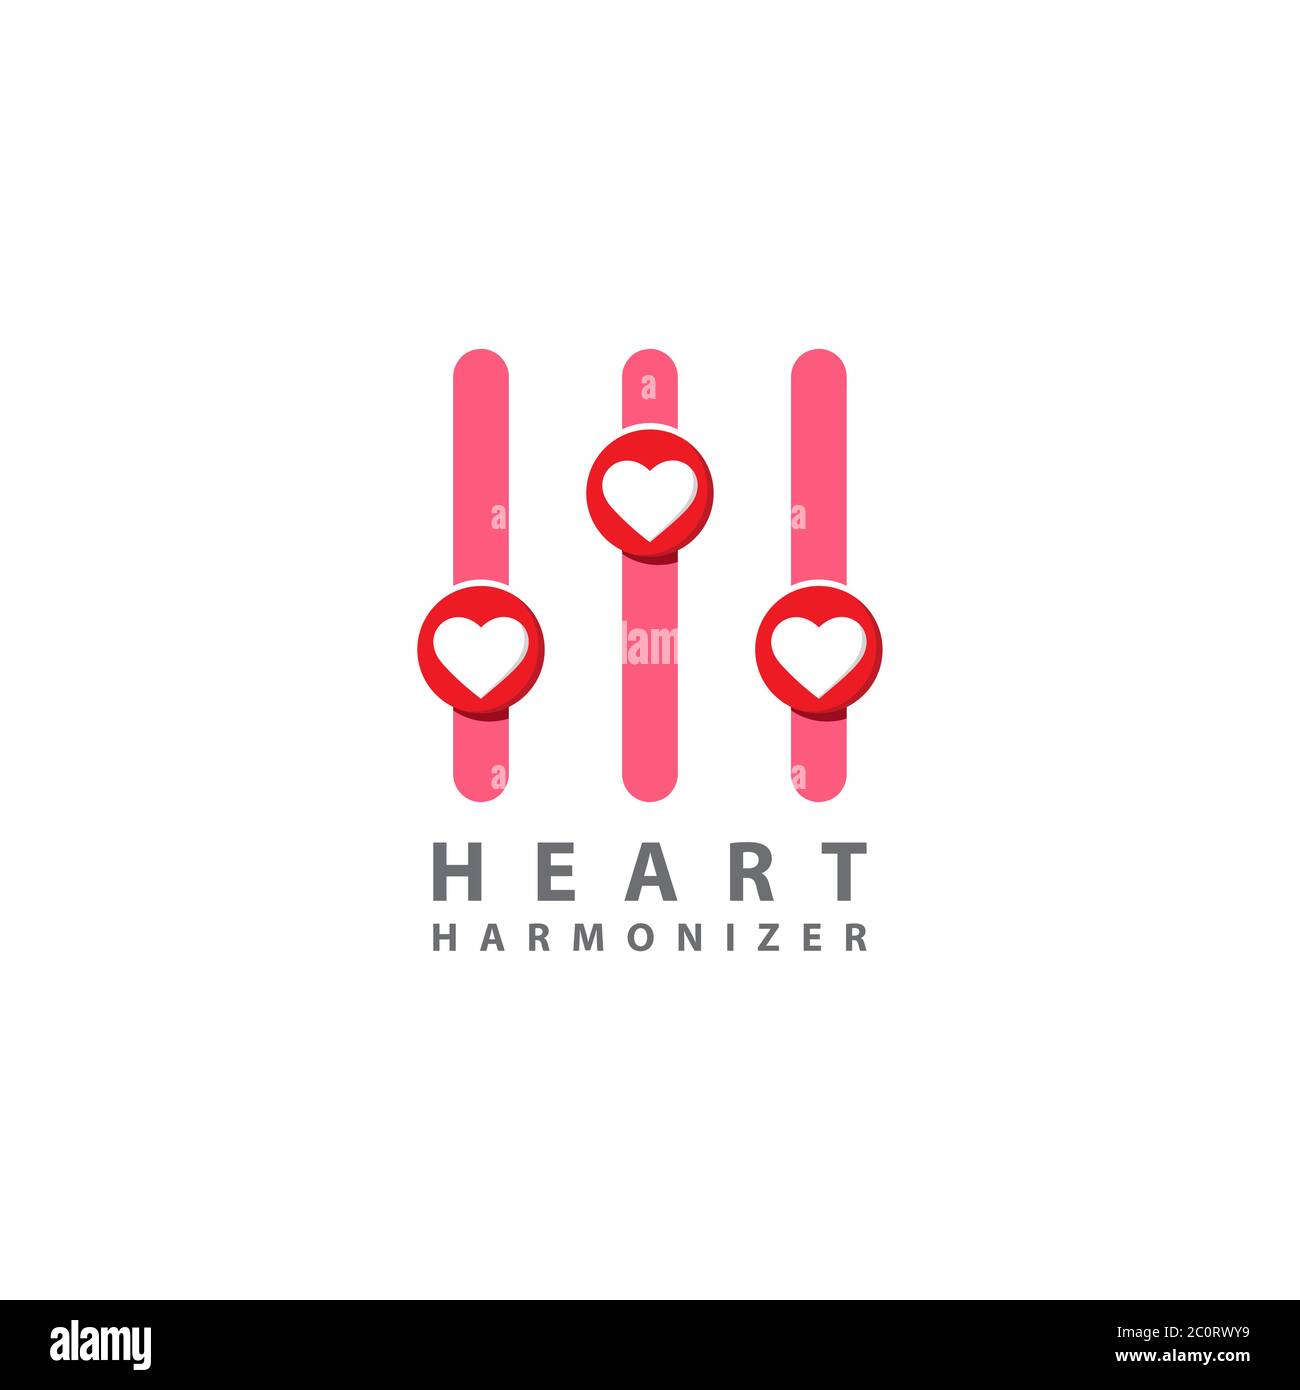 Heart harmonizer logo design template. Heath, love icon with equalizer logo concept. Isolated on white background. Pink and red color theme Stock Vector